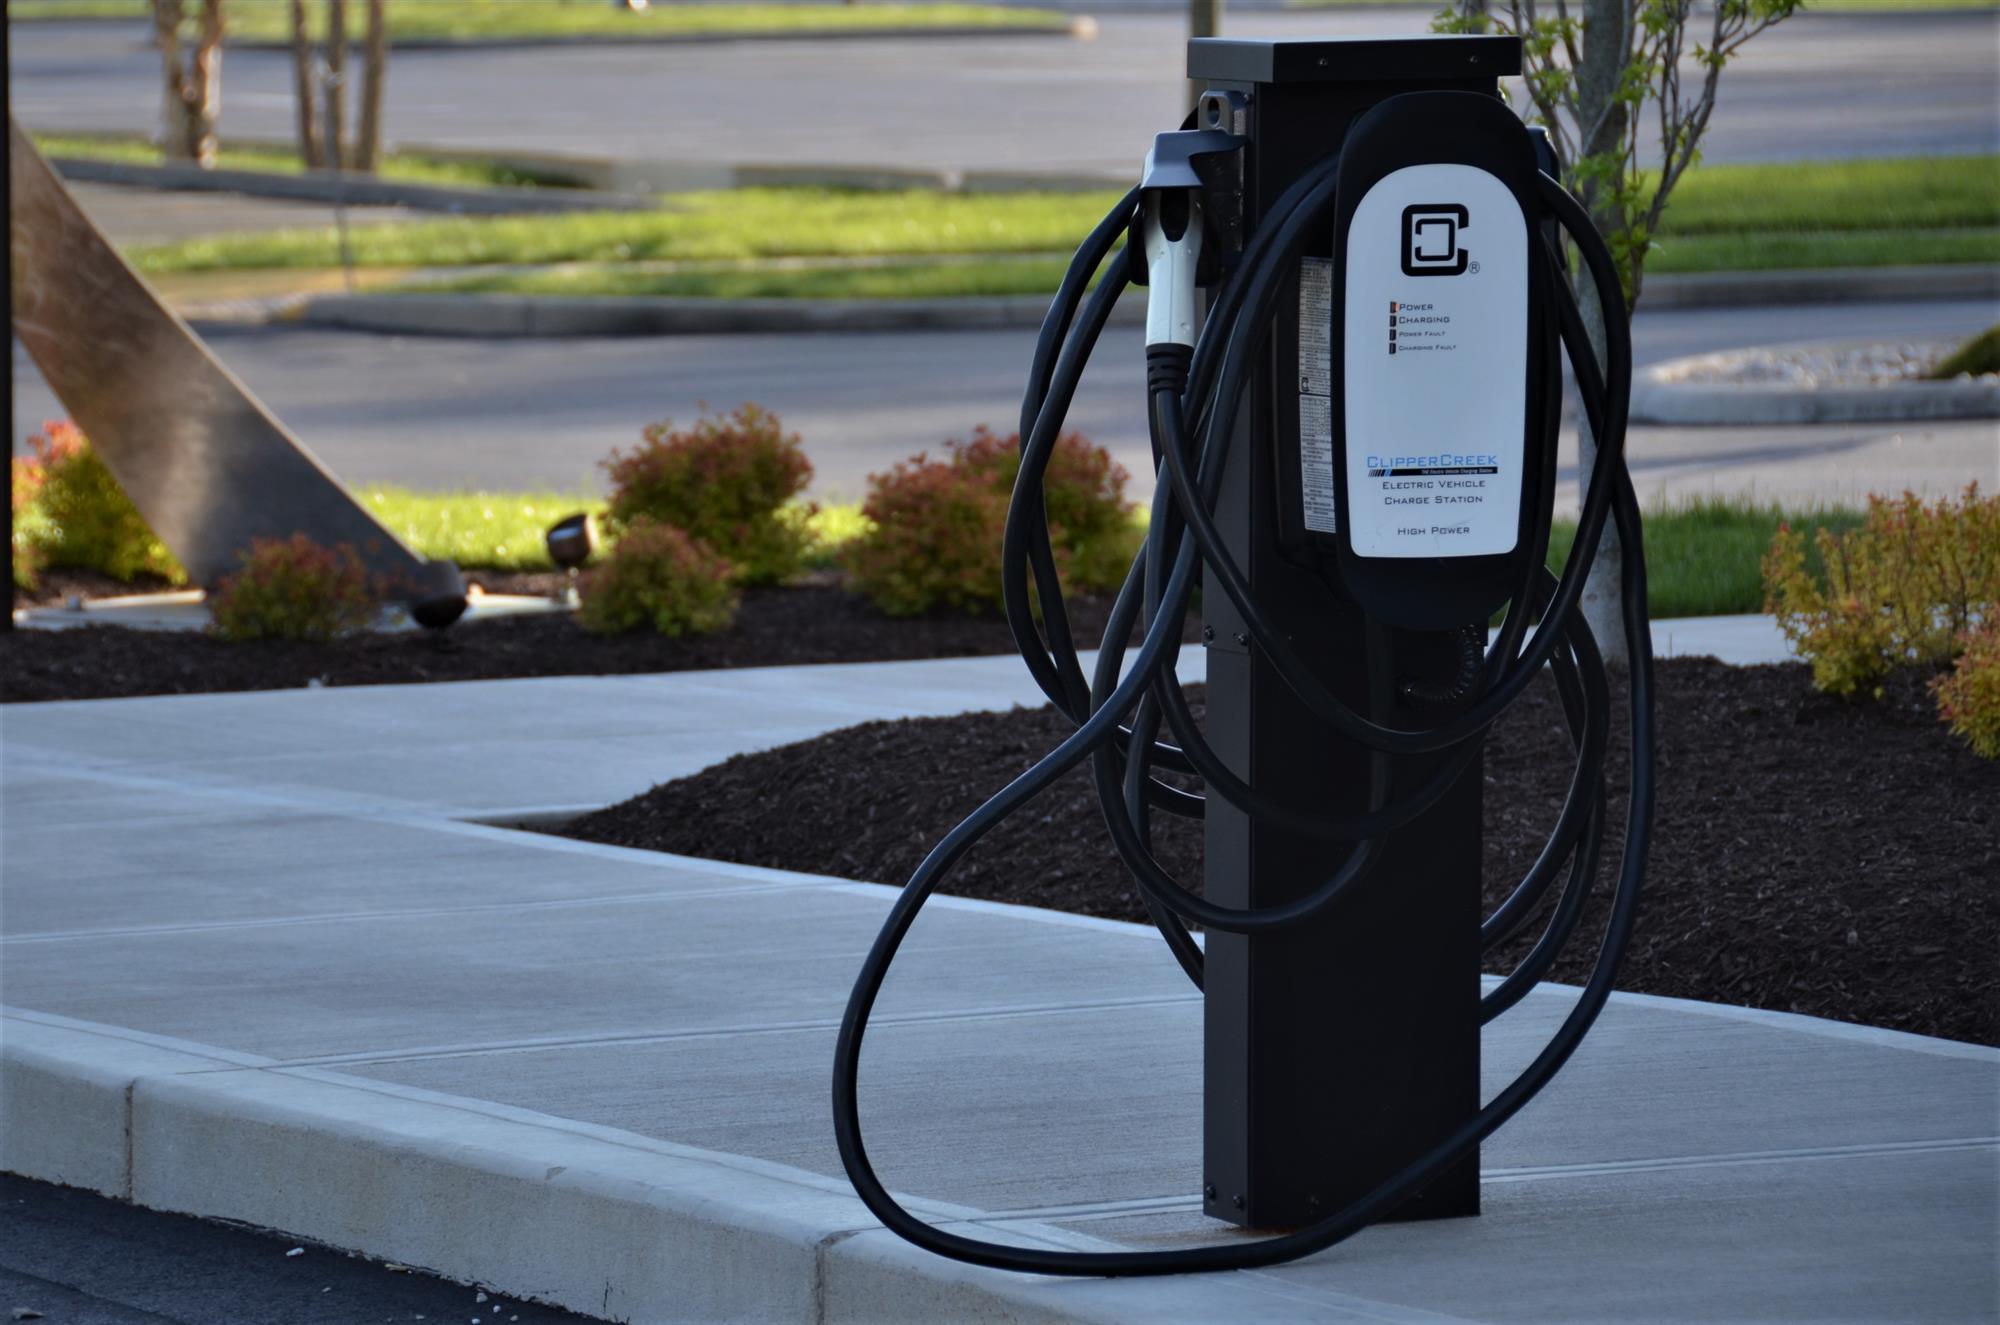 Trawicki Electric installs Electric Vehicle Charging stations in Milwaukee Area